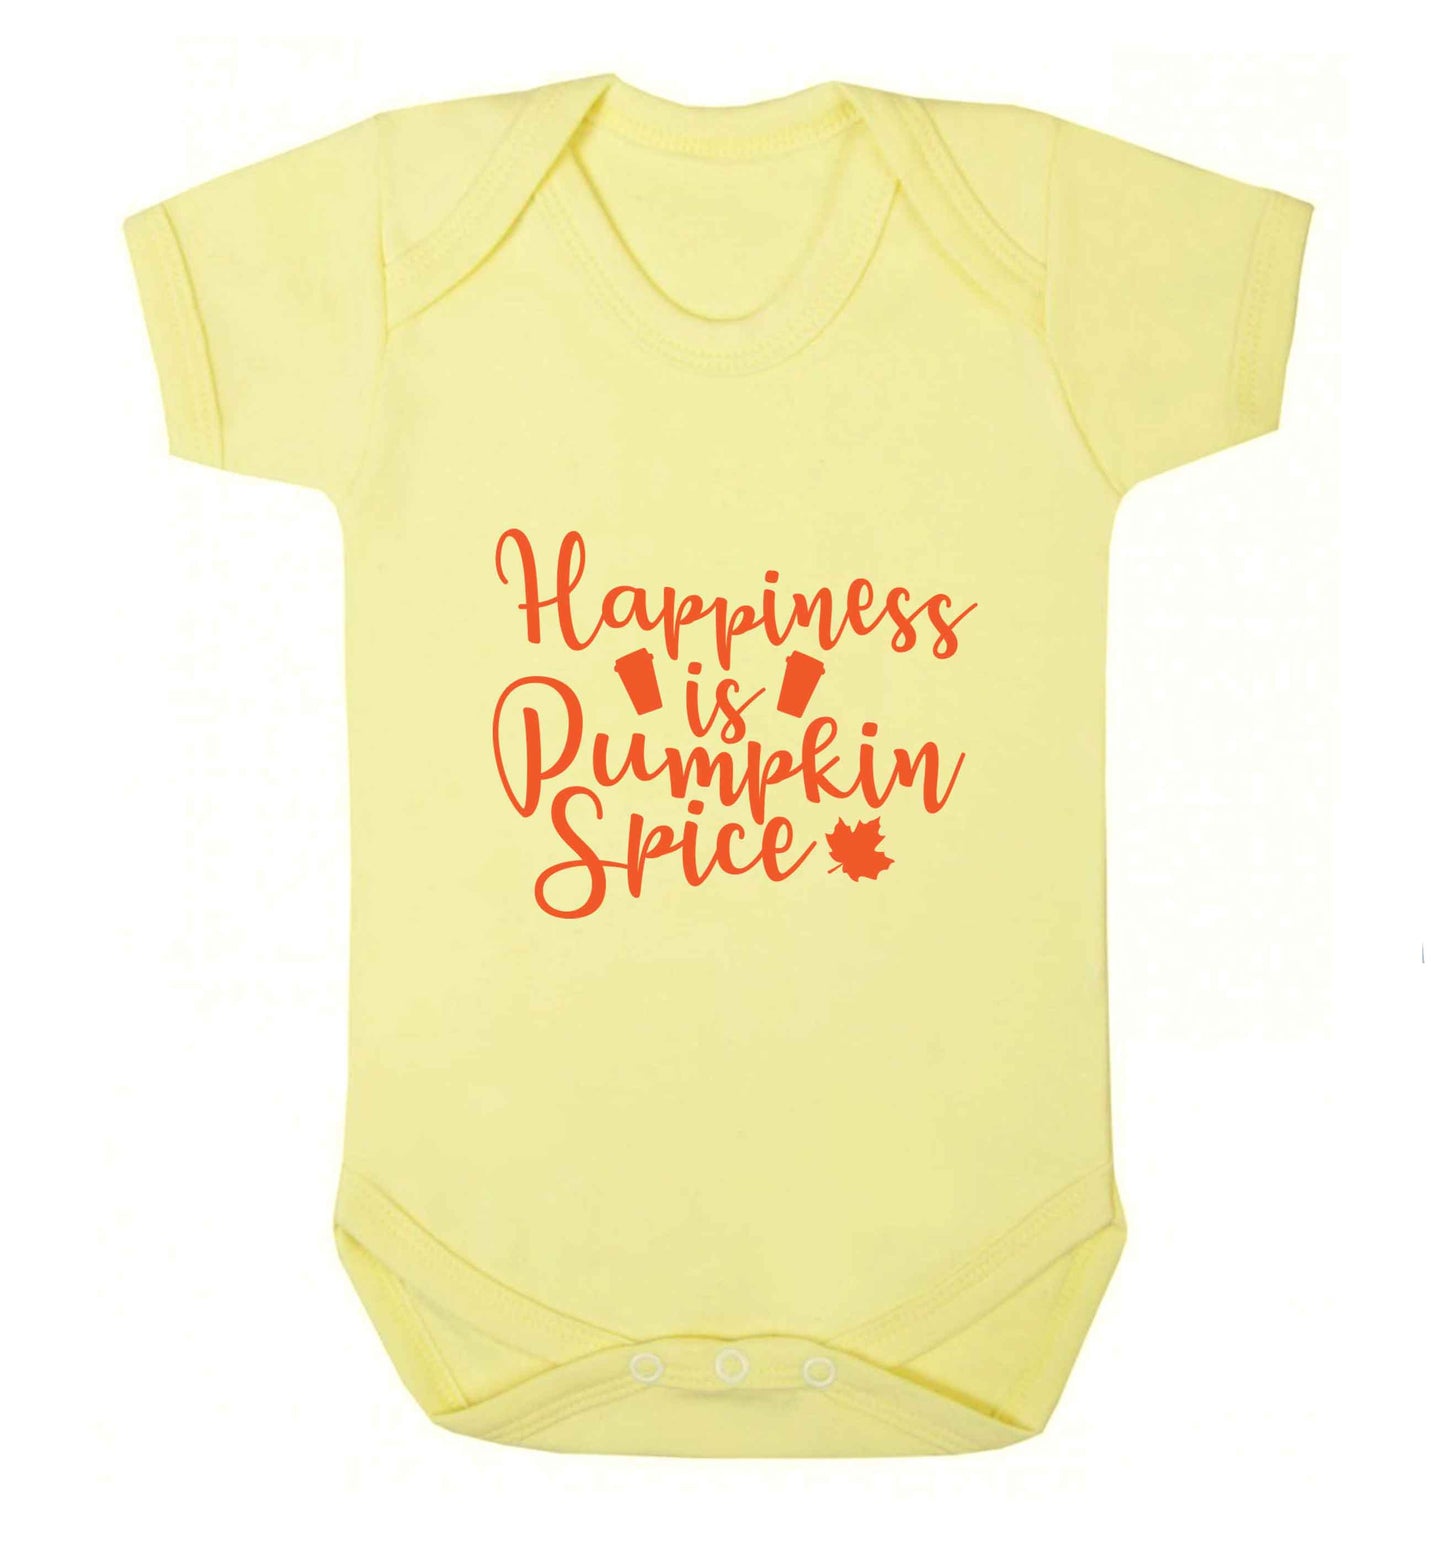 Happiness Pumpkin Spice baby vest pale yellow 18-24 months